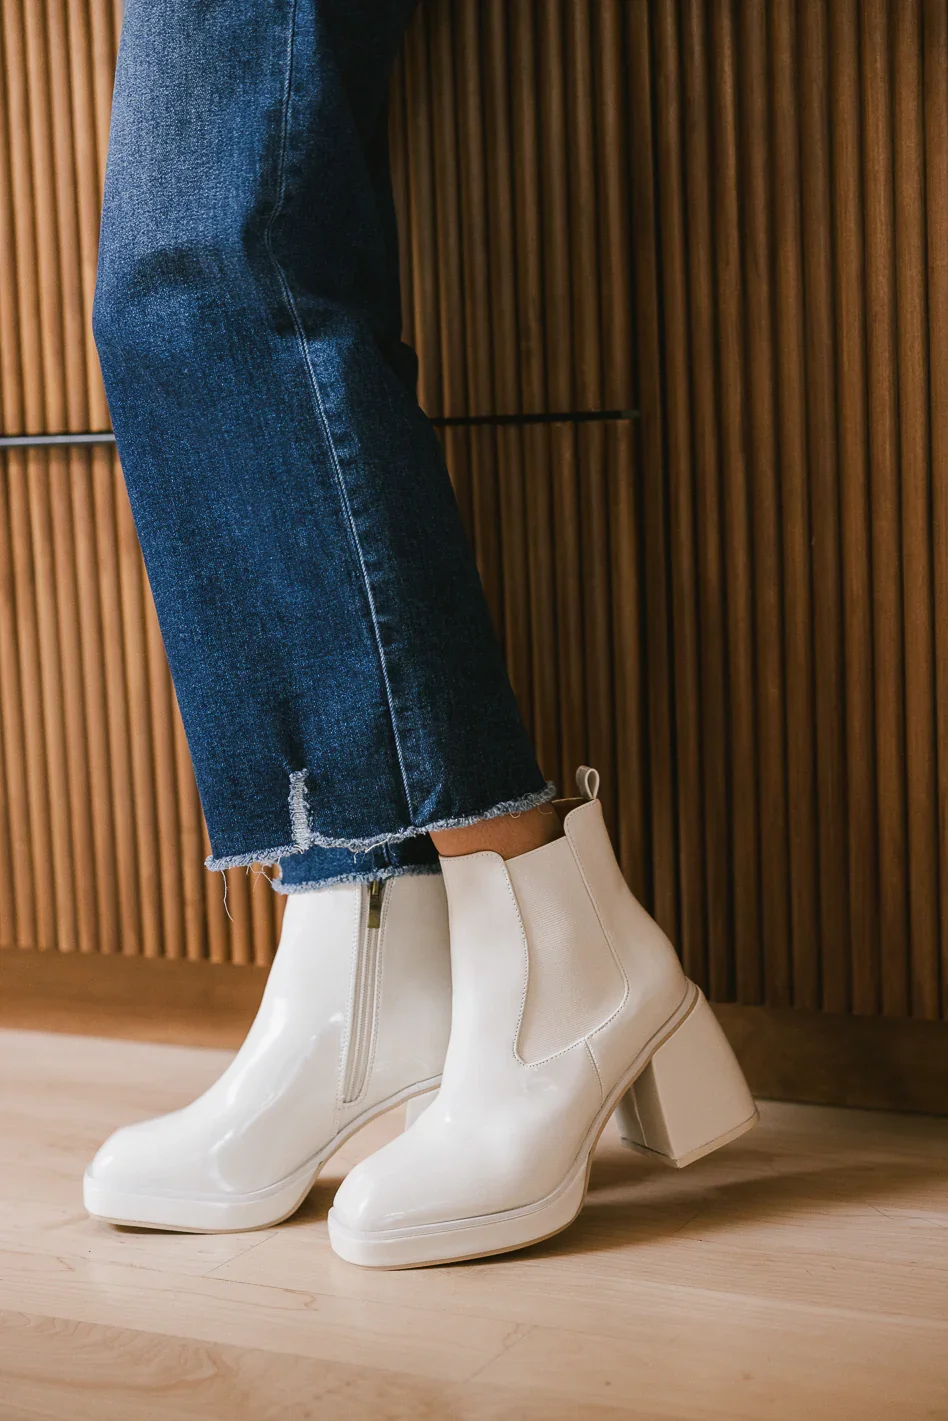 Image of Fallon Heeled Boots in Off White - FINAL SALE